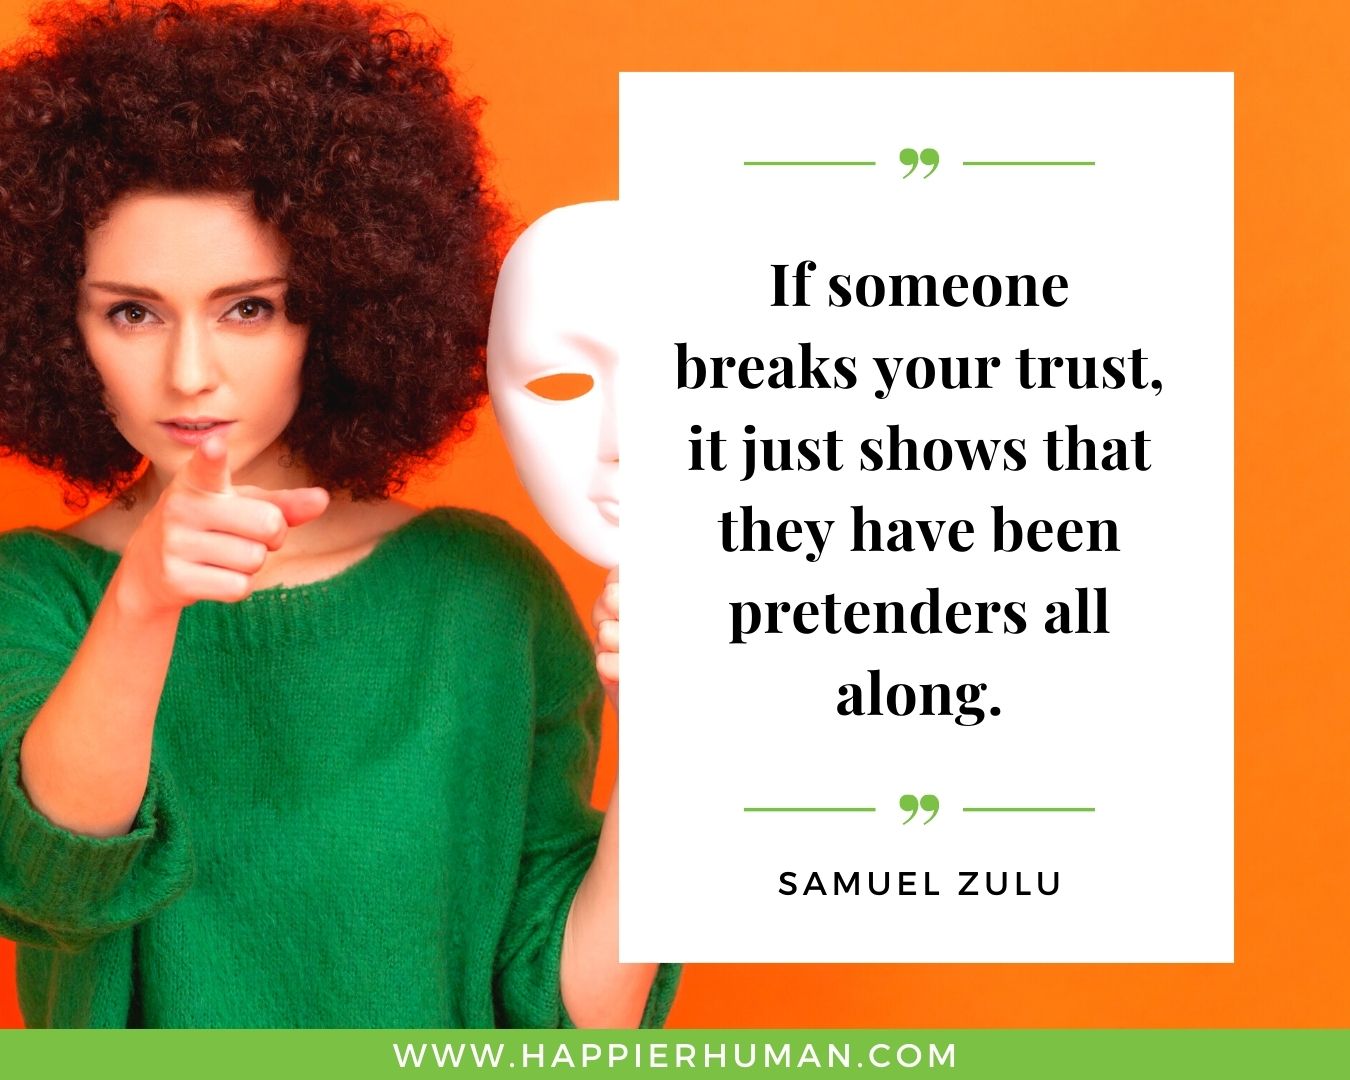 Broken Trust Quotes - “If someone breaks your trust, it just shows that they have been pretenders all along.” - Samuel Zulu